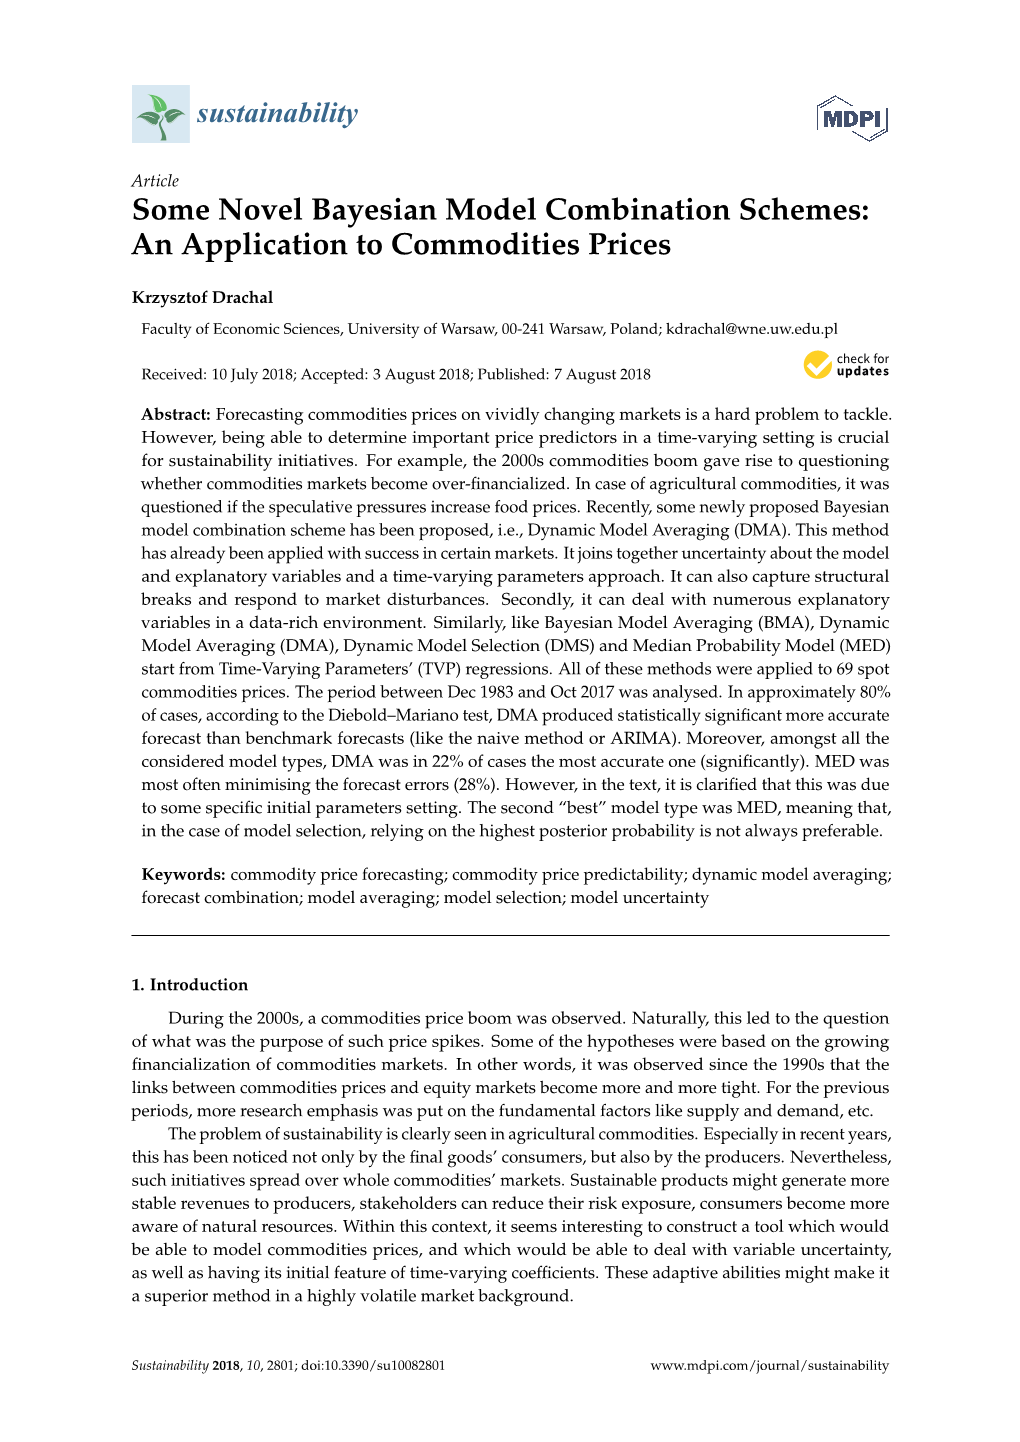 Some Novel Bayesian Model Combination Schemes: an Application to Commodities Prices